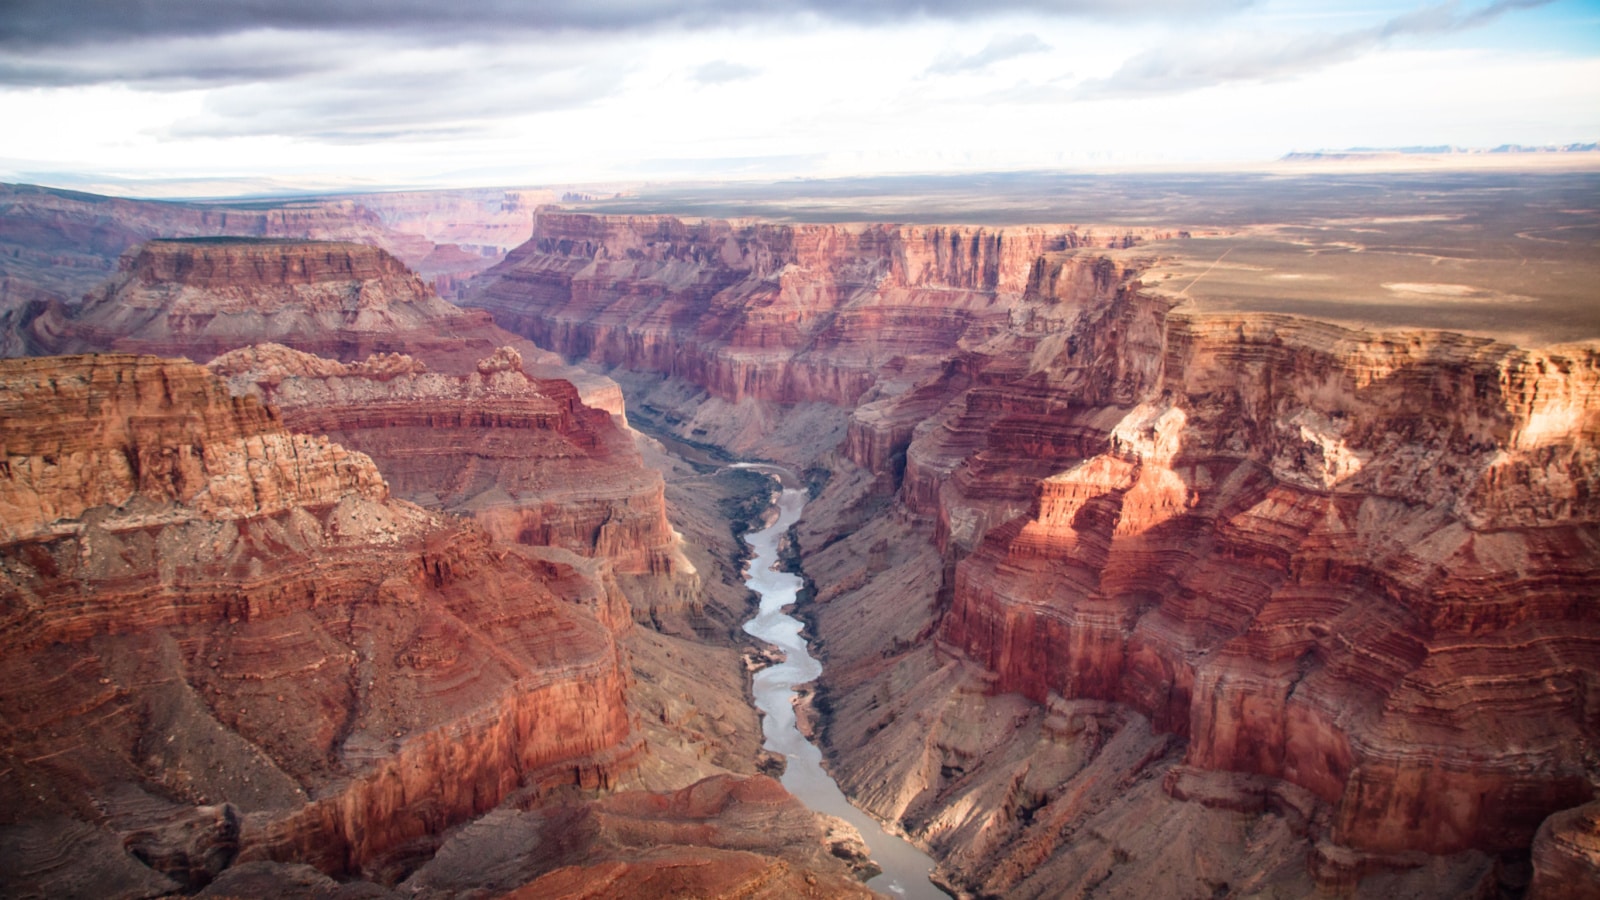 <p>One of the most famous natural wonders in the world, the Grand Canyon is located in northern Arizona. Carved by the Colorado River, the canyon showcases awe-inspiring vistas and vibrant geological layers, drawing millions of visitors each year.</p>